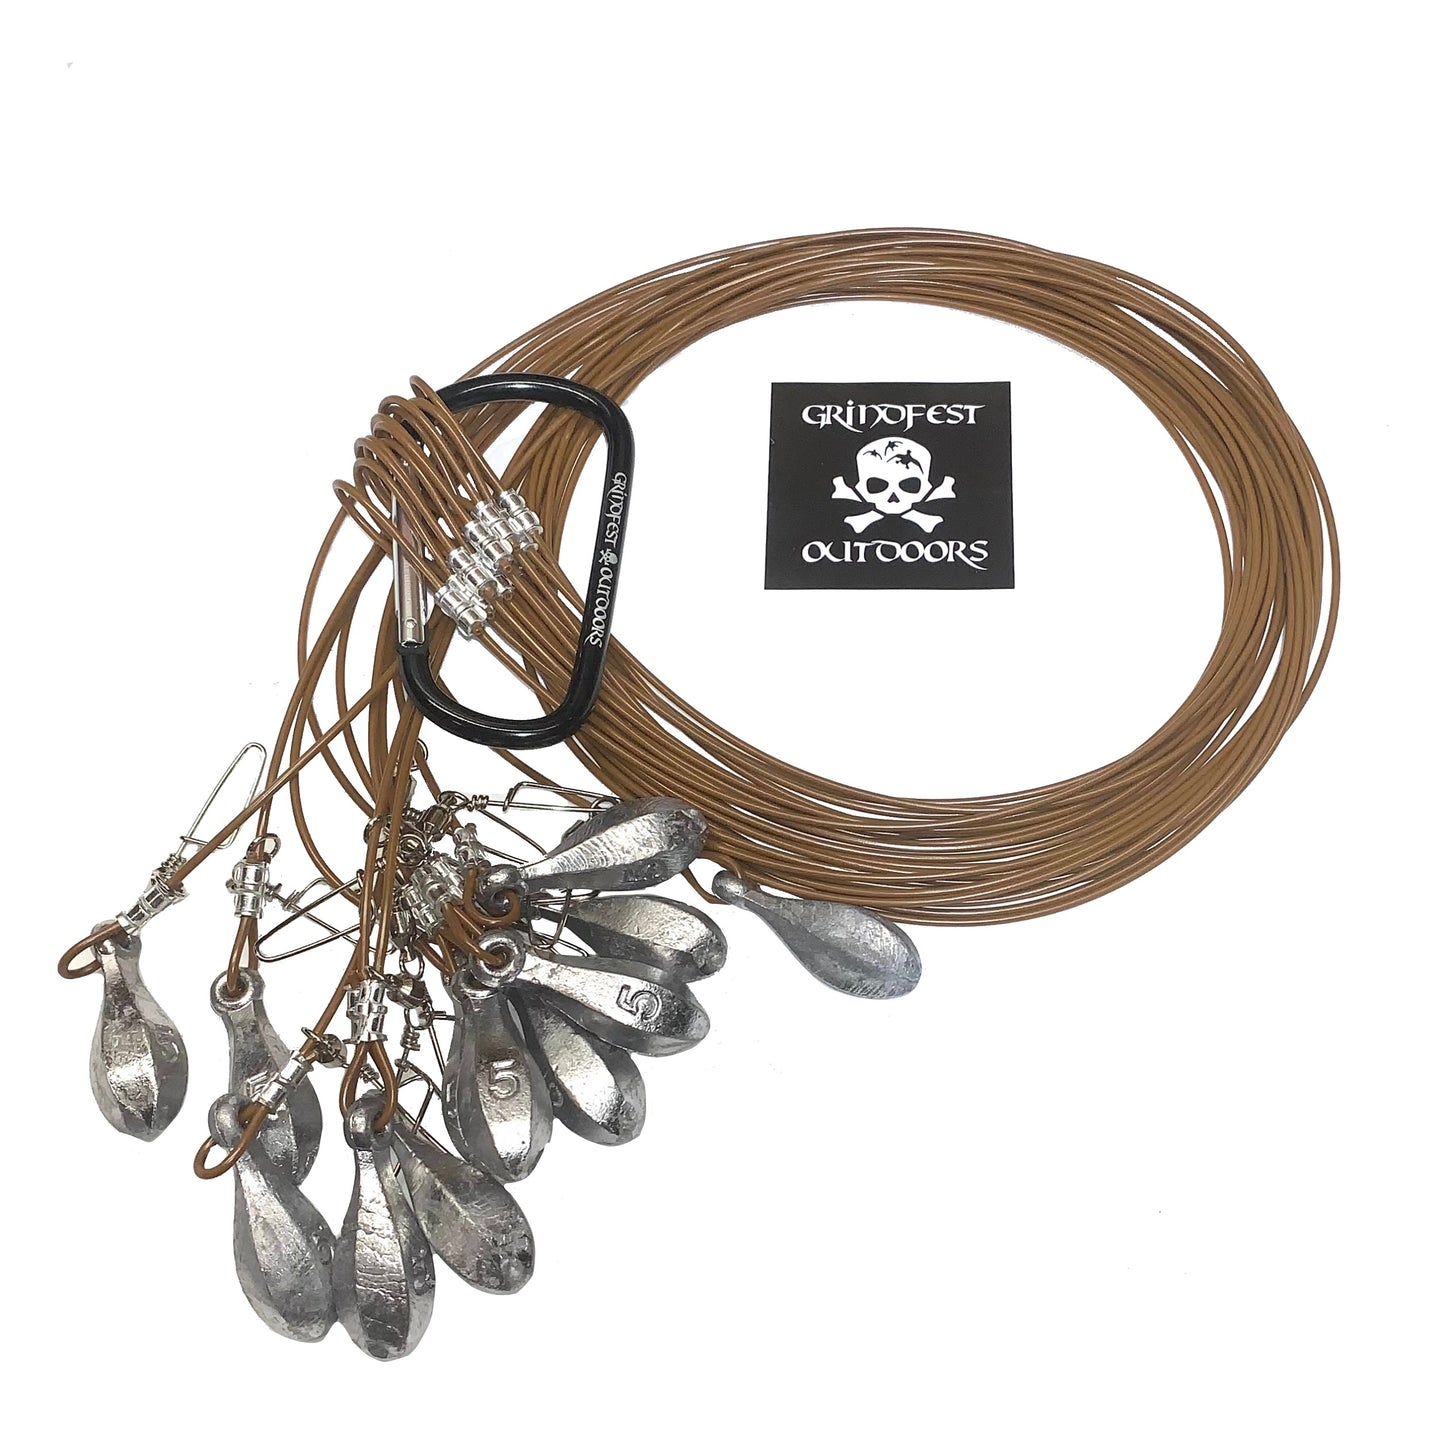 5oz Coated Steel Cable Texas Rigs